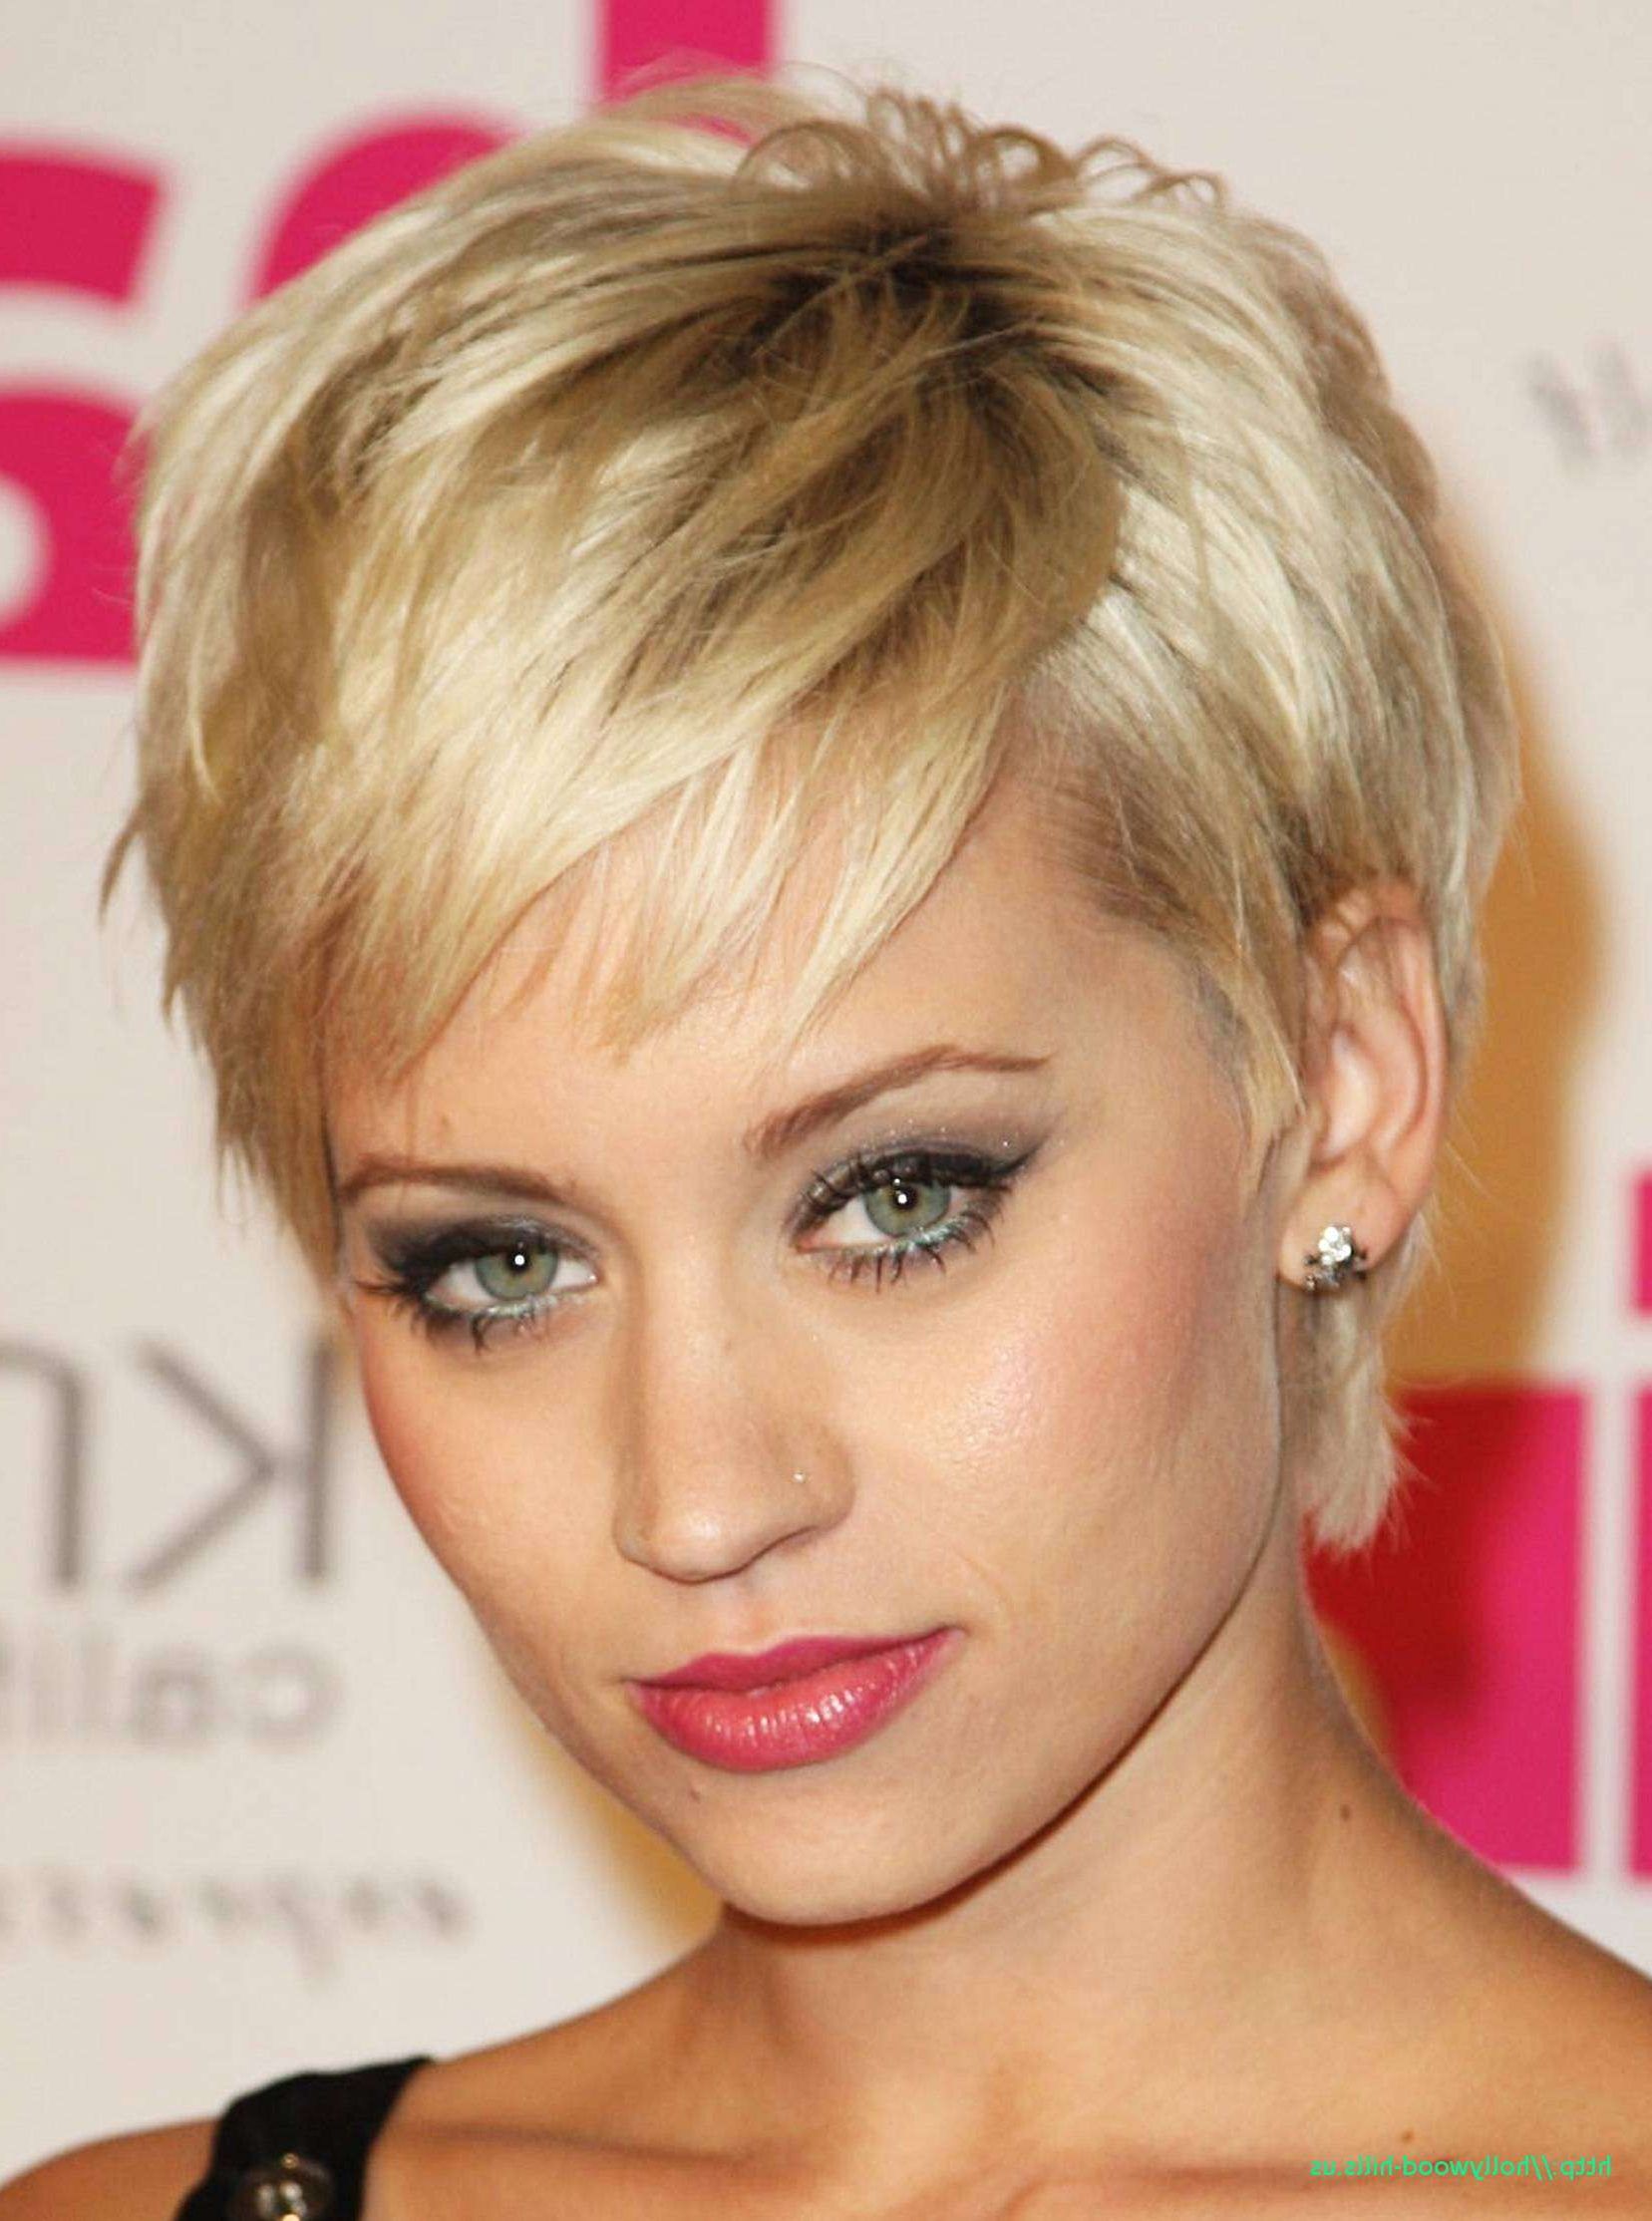 Blonde Hairstyles To Make You Look Younger Inspirational Short Intended For Short Hairstyles That Make You Look Younger (Photo 9 of 25)